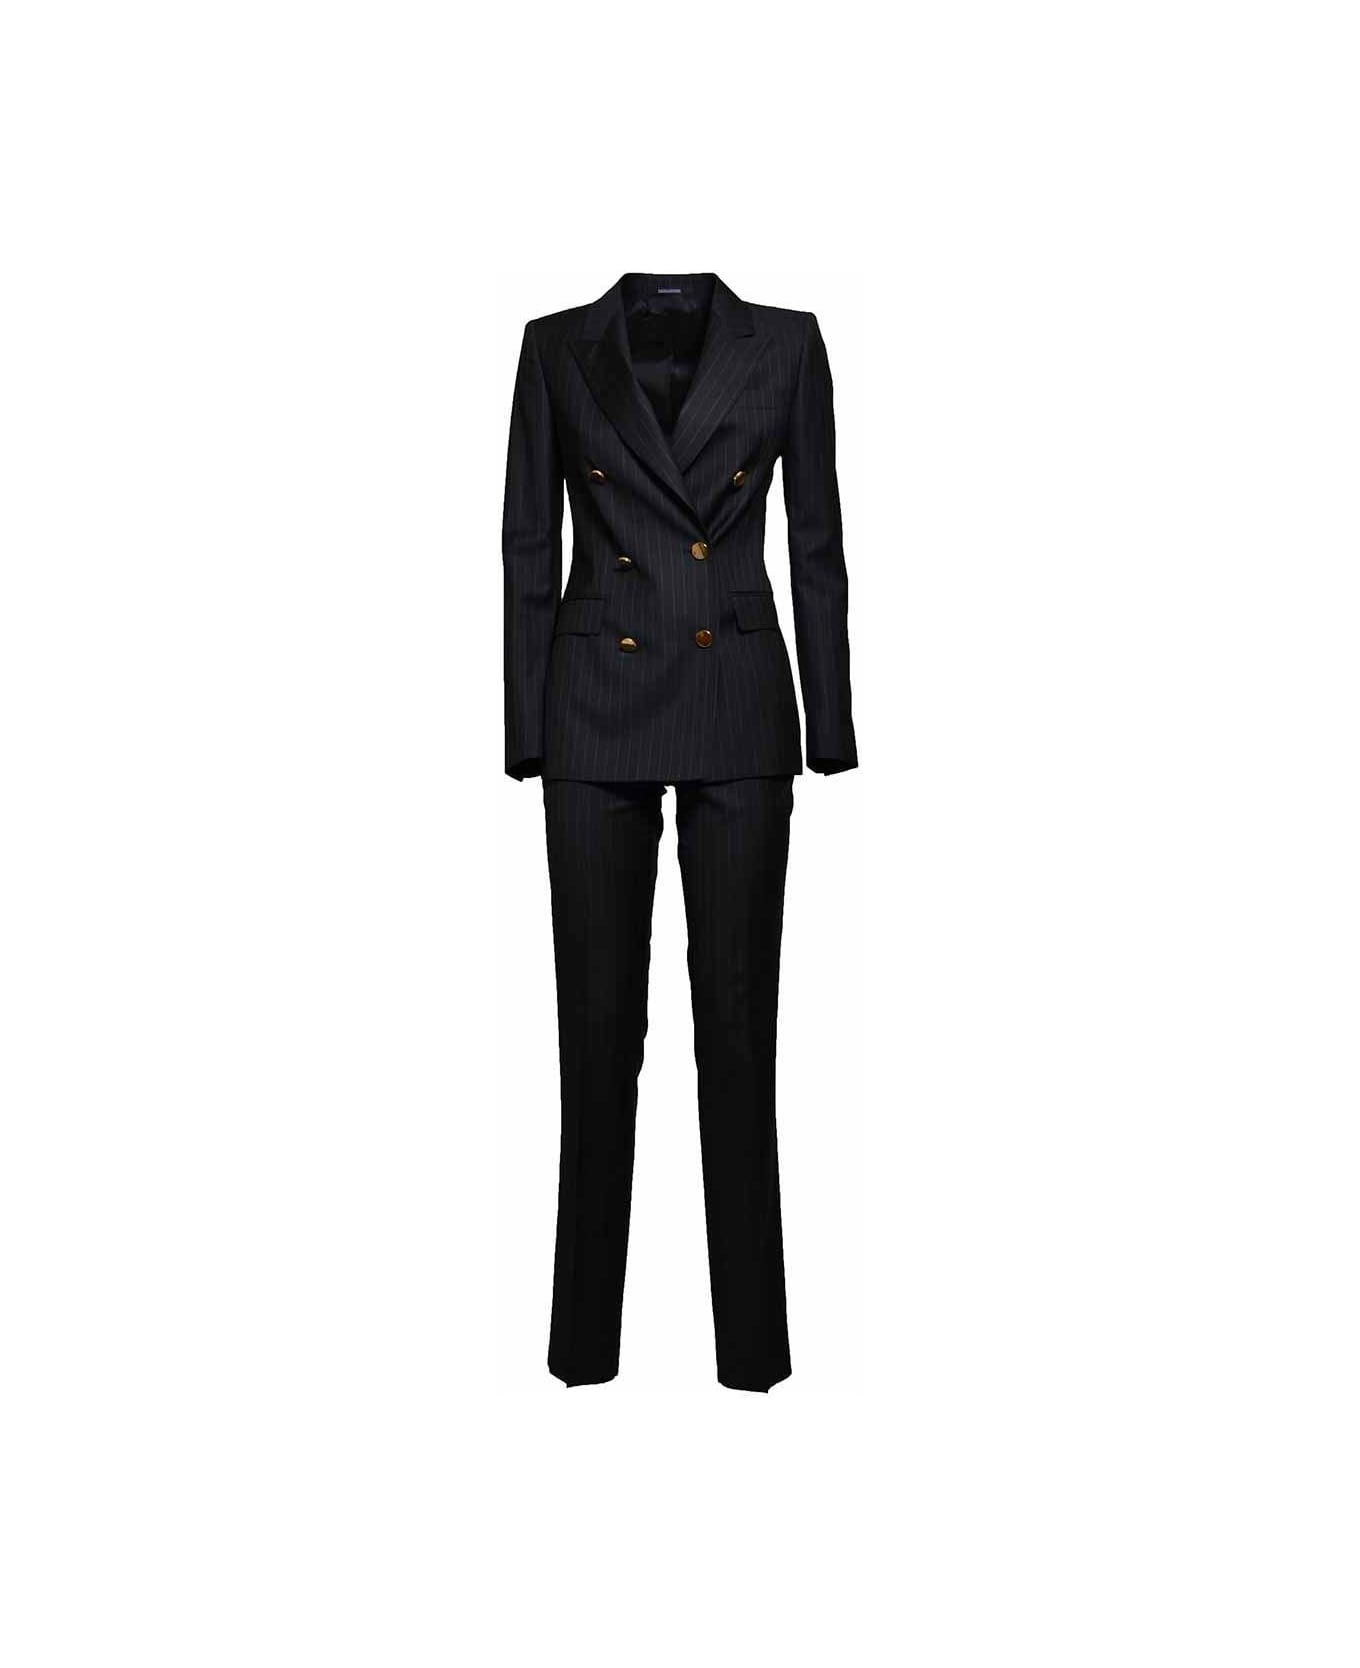 Tagliatore Double-breasted Two-piece Suit Set - Nero スーツ